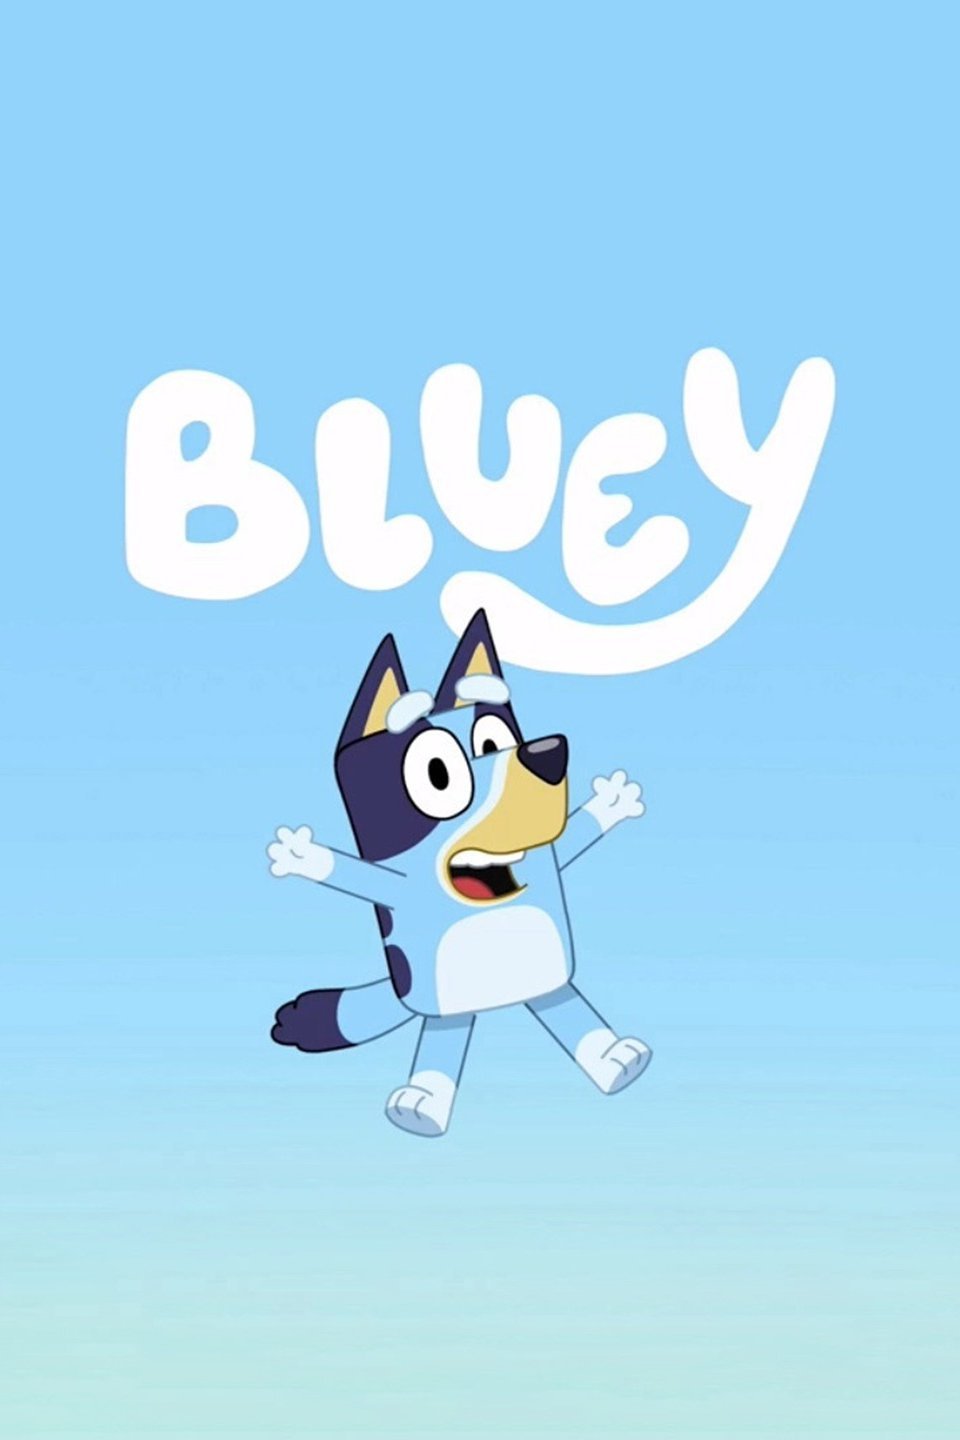 Bluey  Heres some Bluey home screens for your phone   Facebook